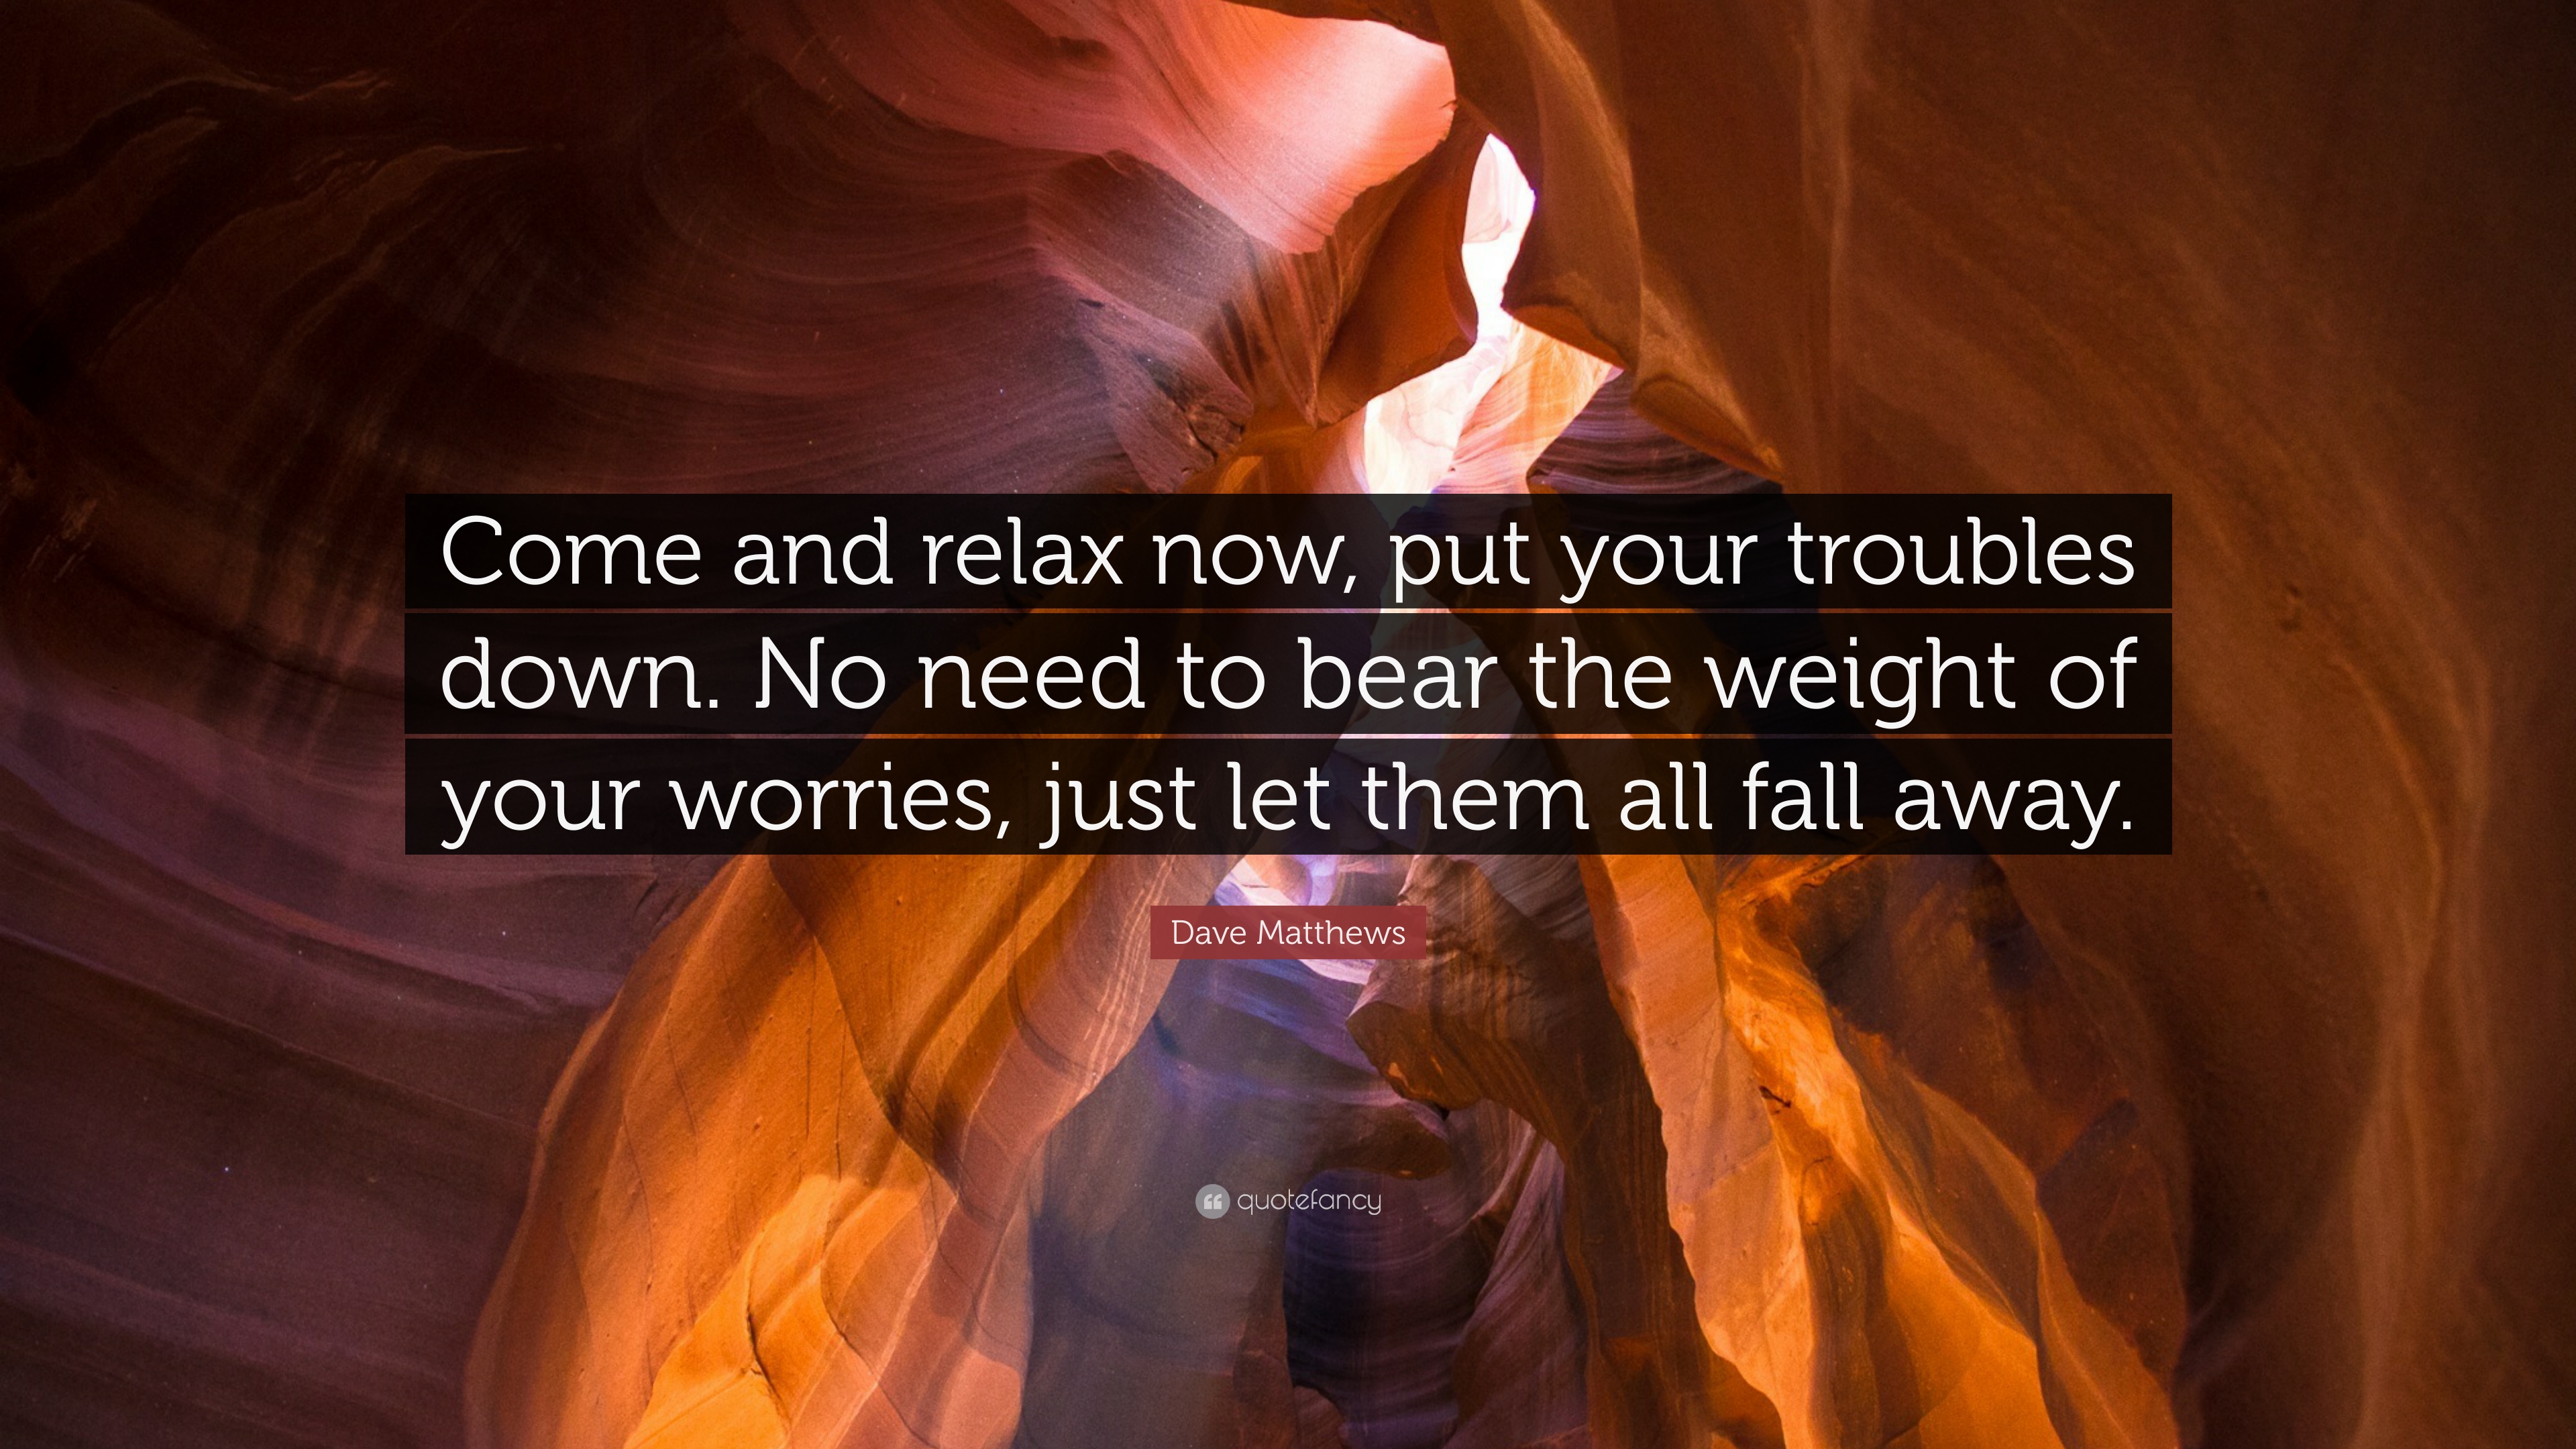 Dave Matthews Quote: “Come and relax now, put your troubles down. No ...